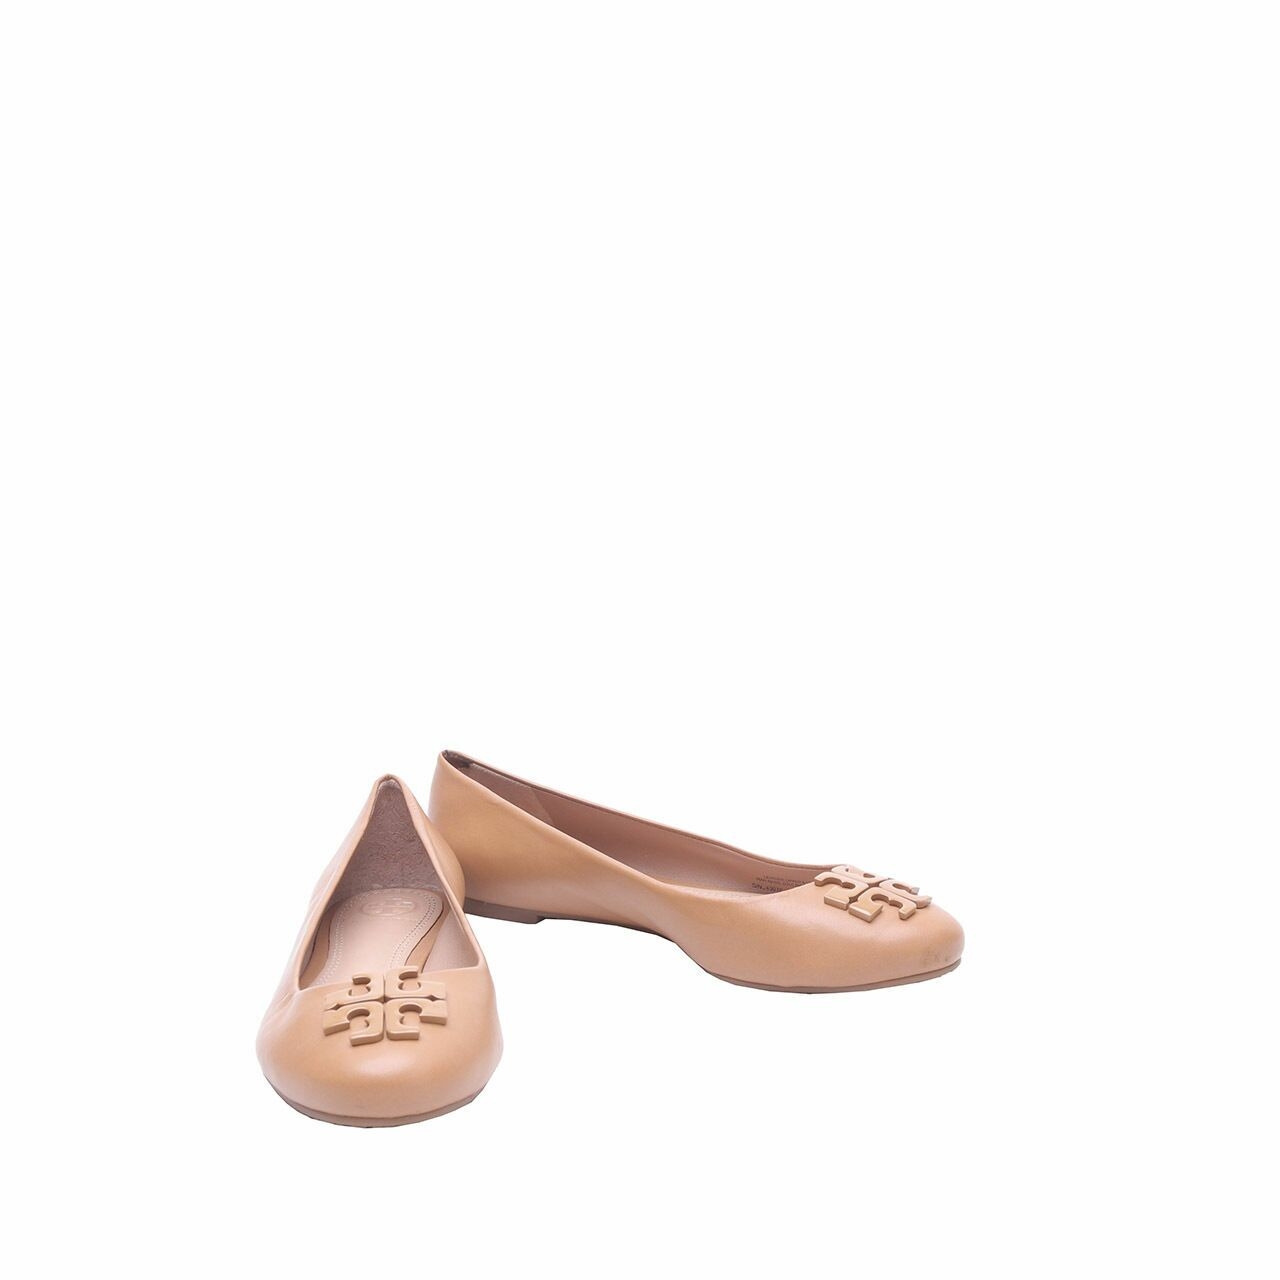 Tory Burch Lowell 2 Leather Blond Flats Shoes